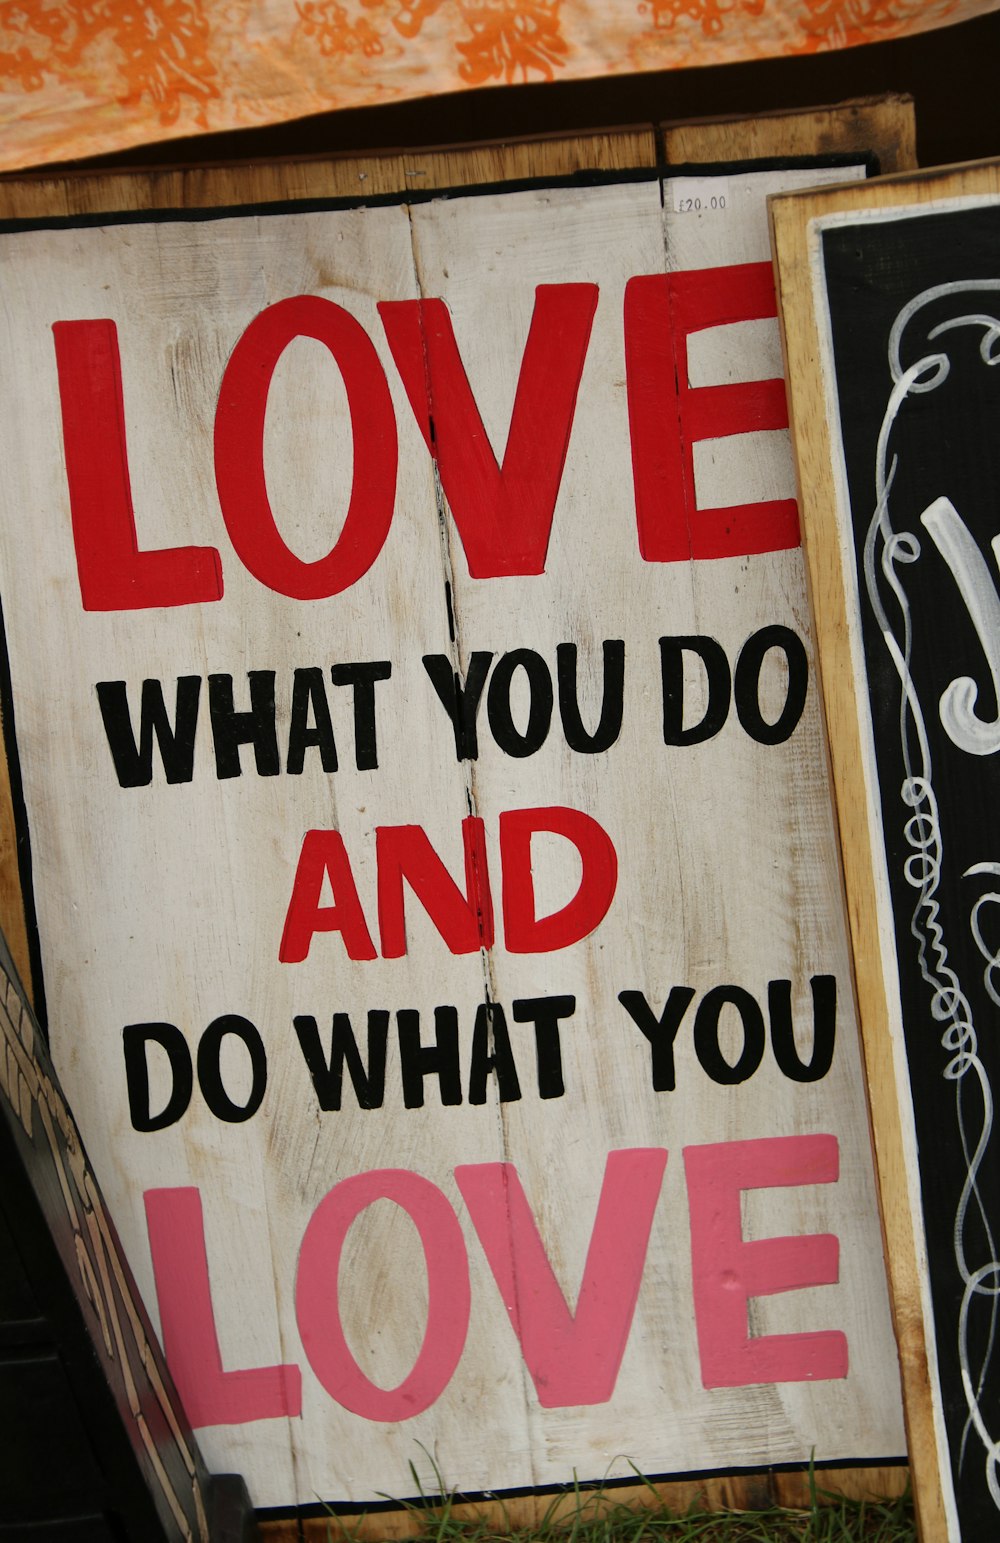 Love What You Do and Do What You Love poster